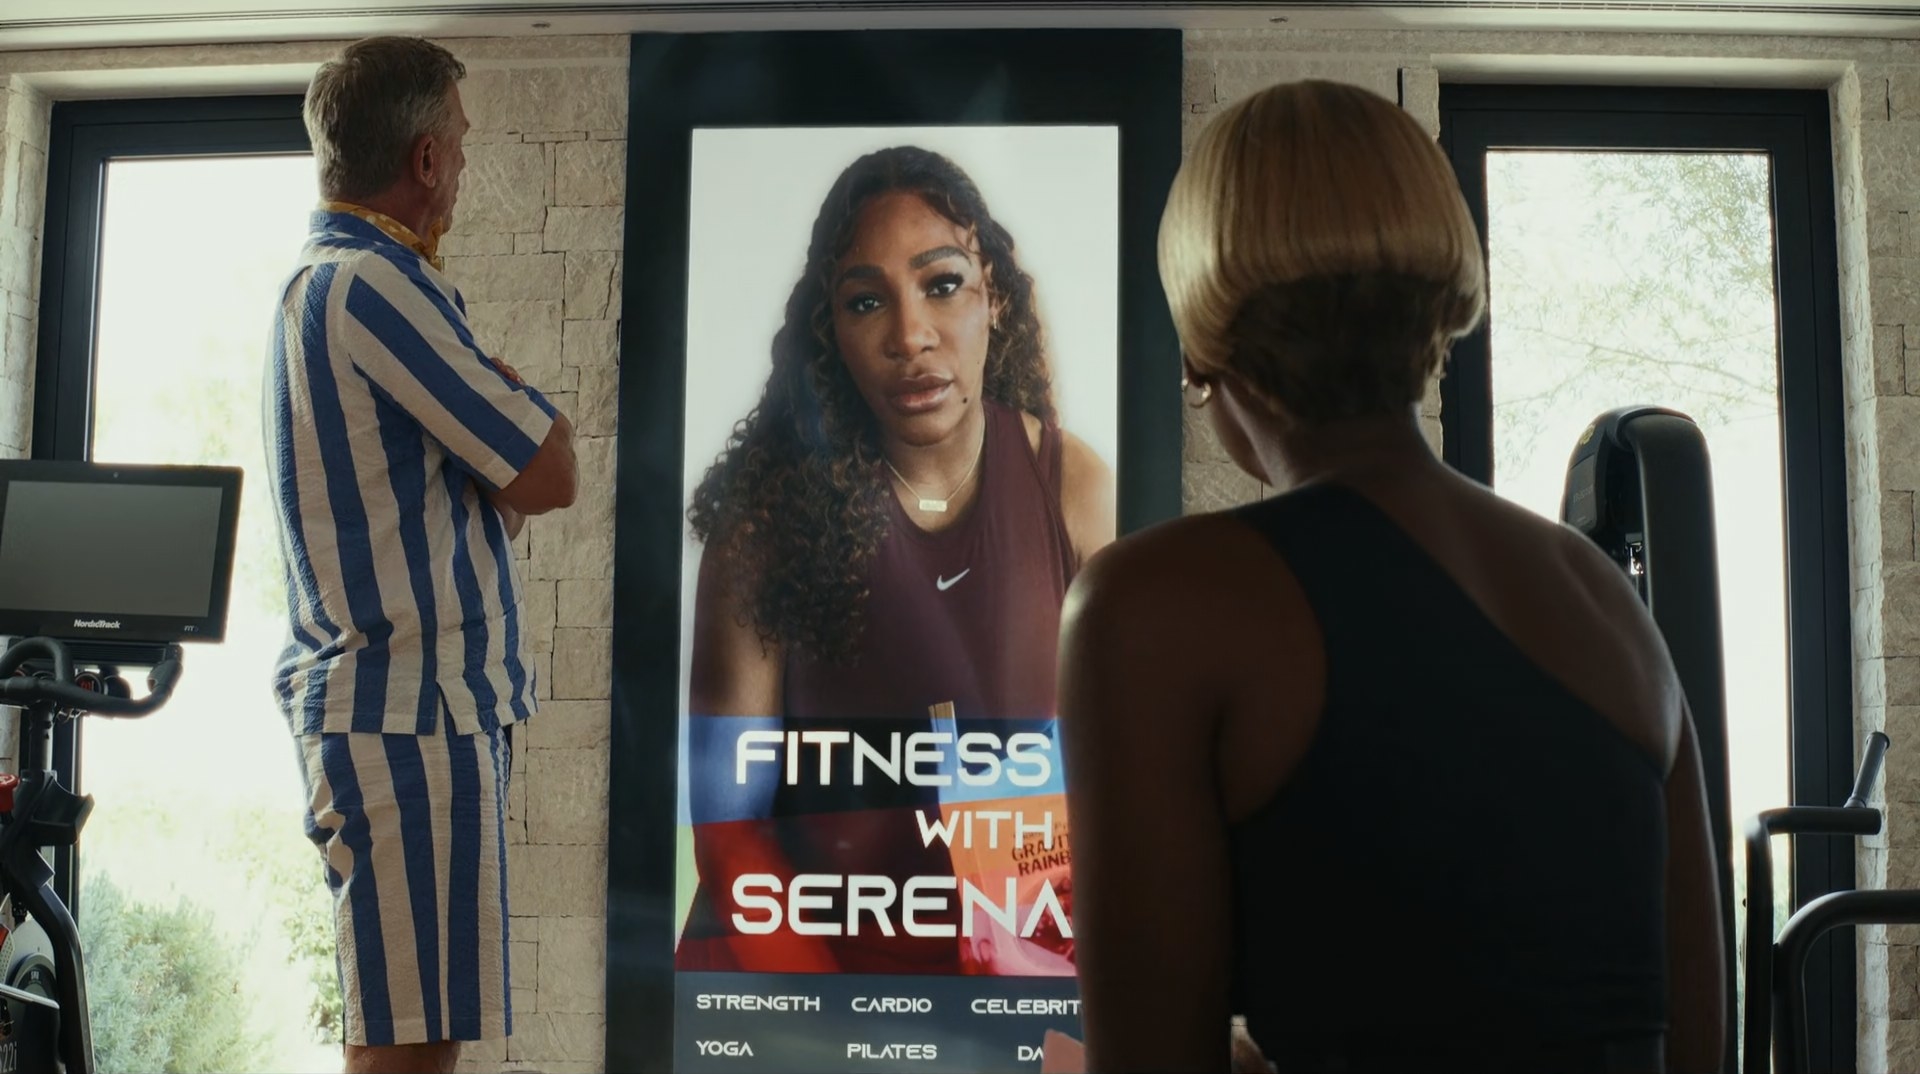 Serena Williams speaks on a screen while Janelle Monáe and Daniel Craig look at her